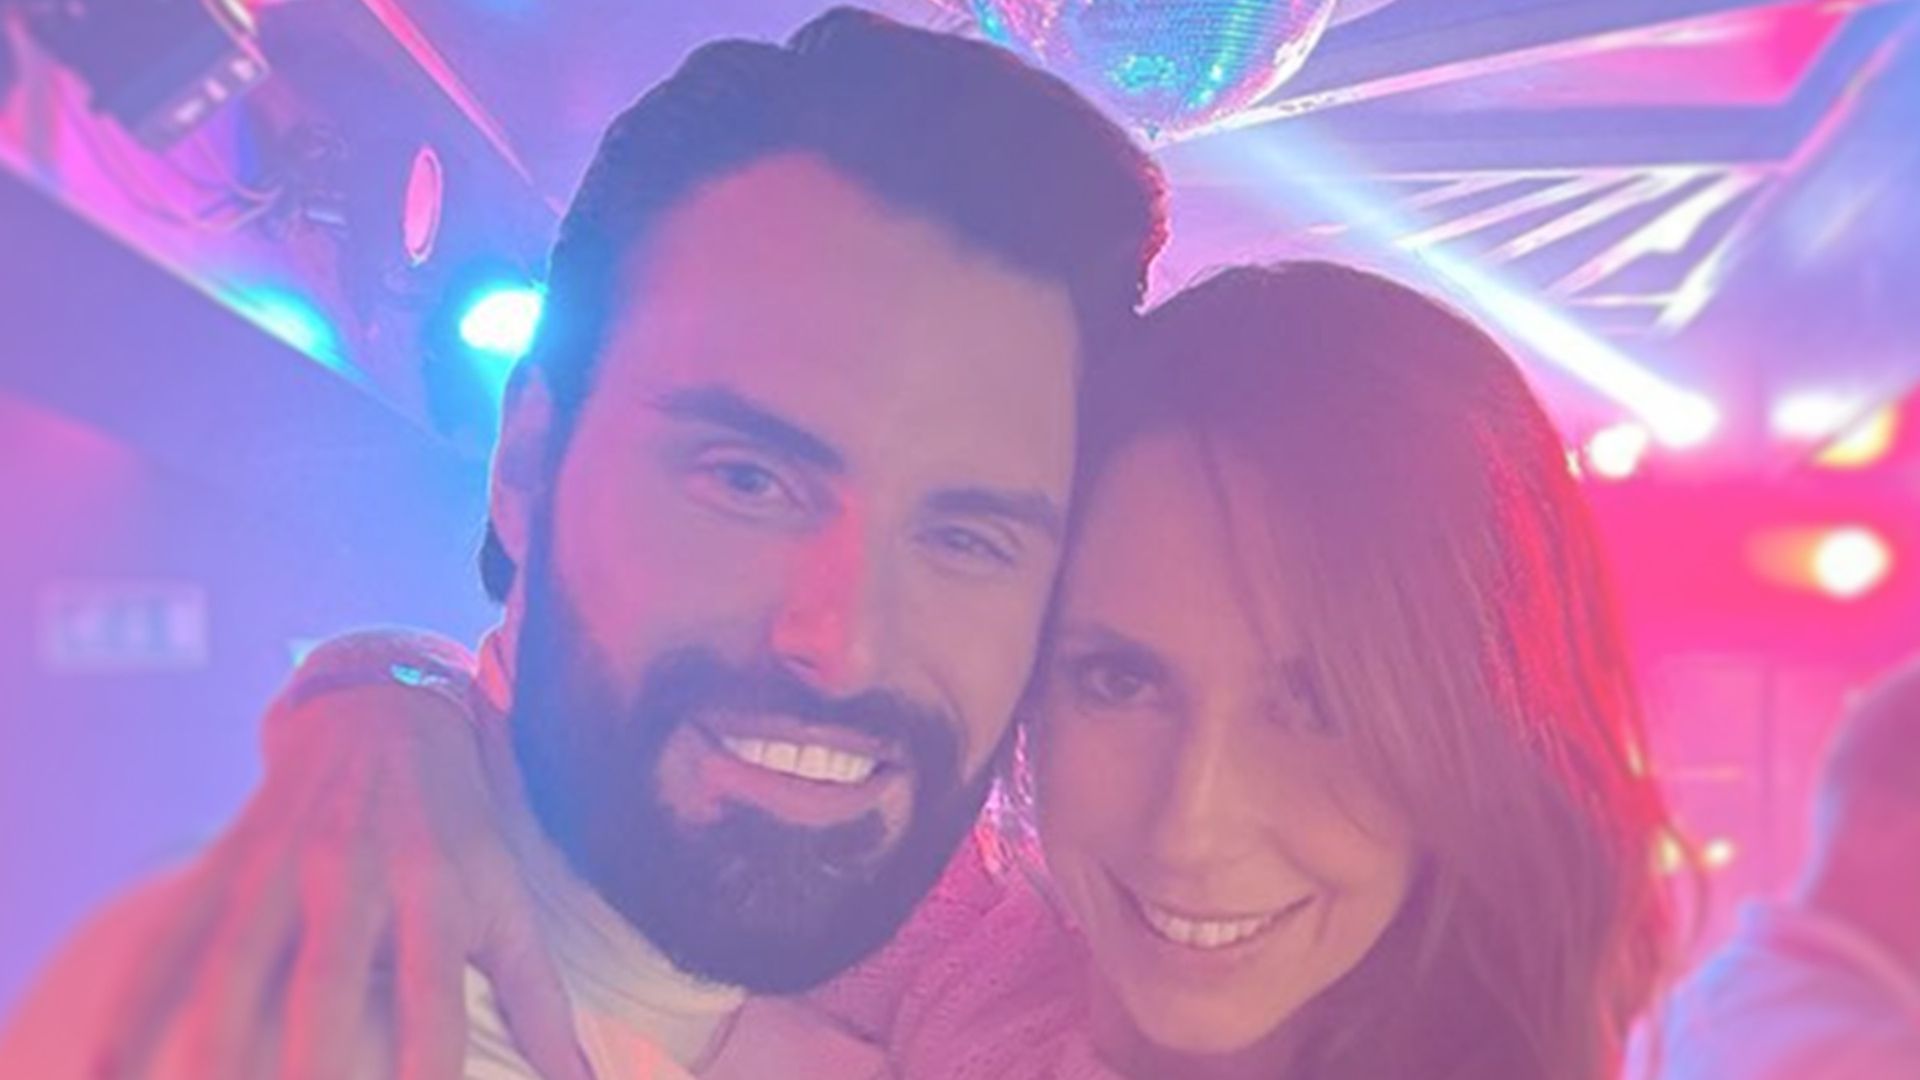 Alex Jones and Rylan Clark pole dance during epic night out